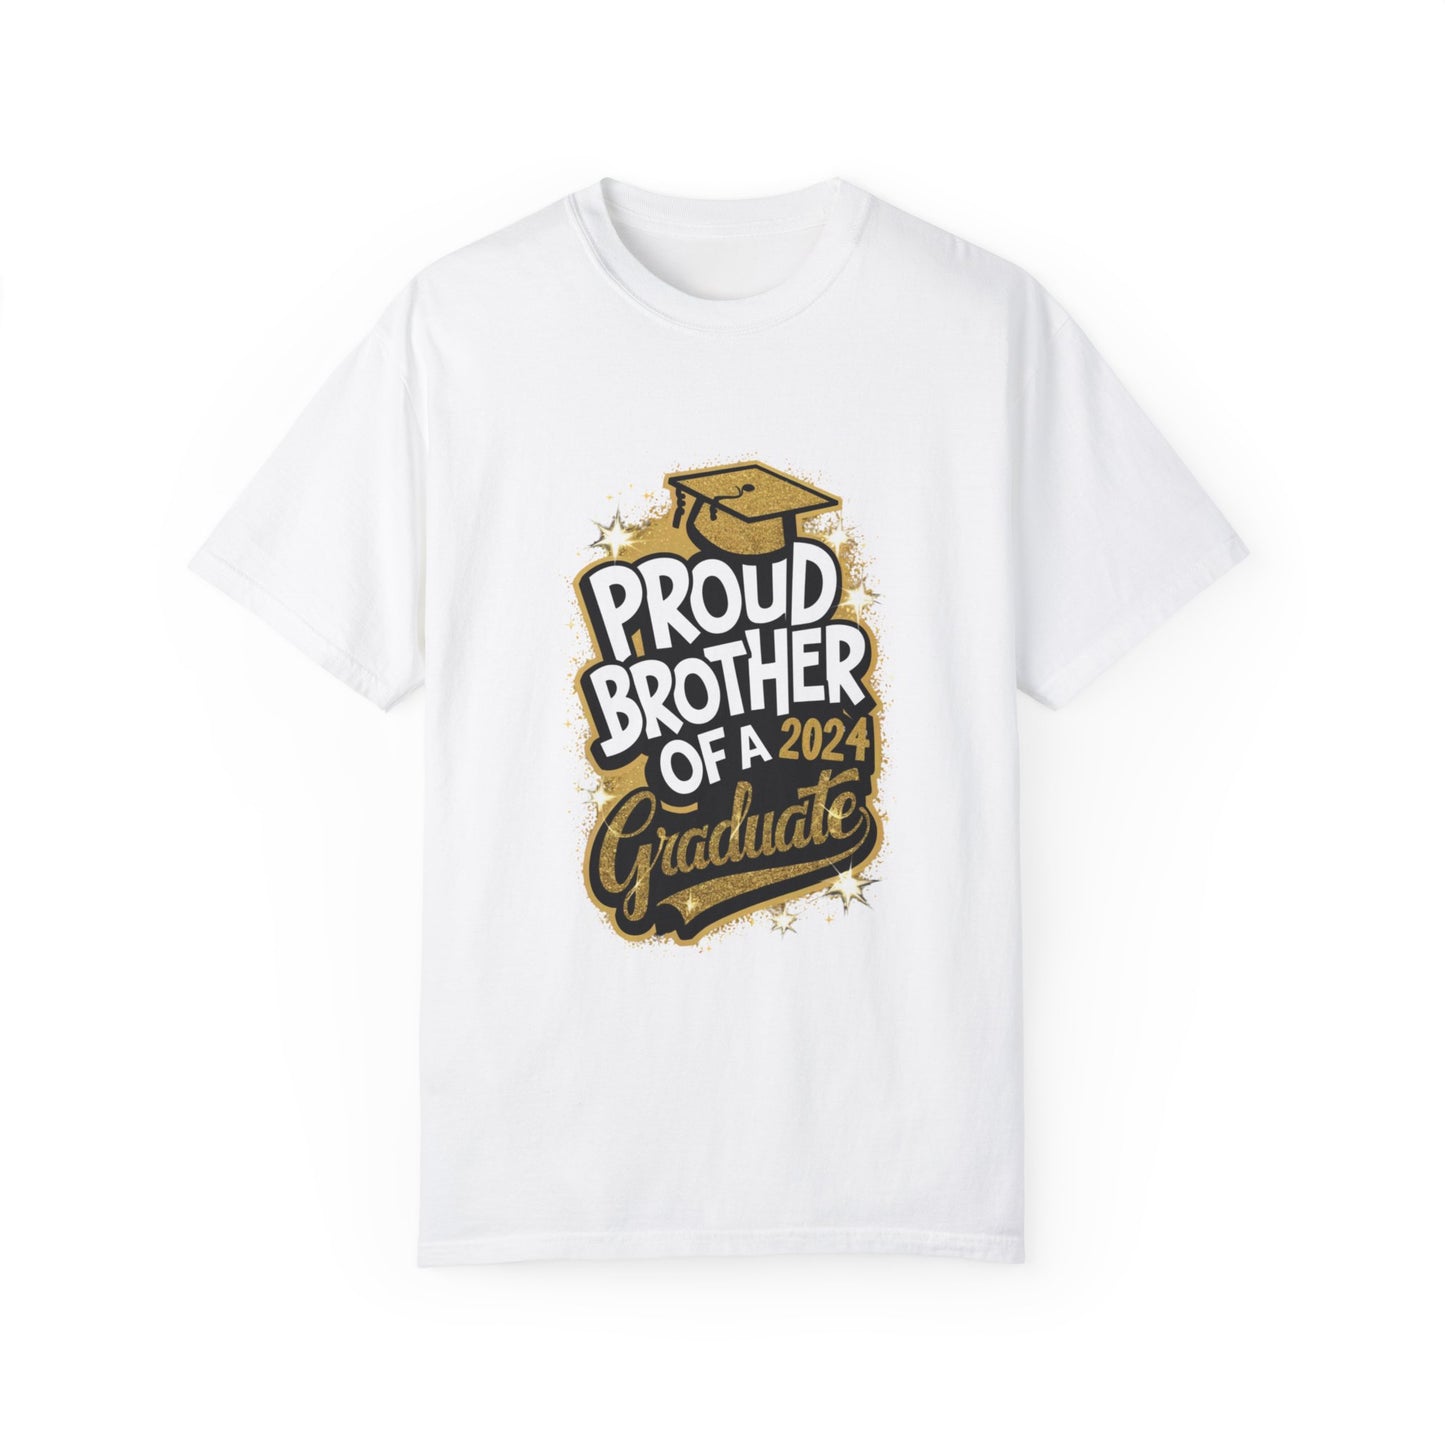 Proud Brother of a 2024 Graduate Unisex Garment-dyed T-shirt Cotton Funny Humorous Graphic Soft Premium Unisex Men Women White T-shirt Birthday Gift-3